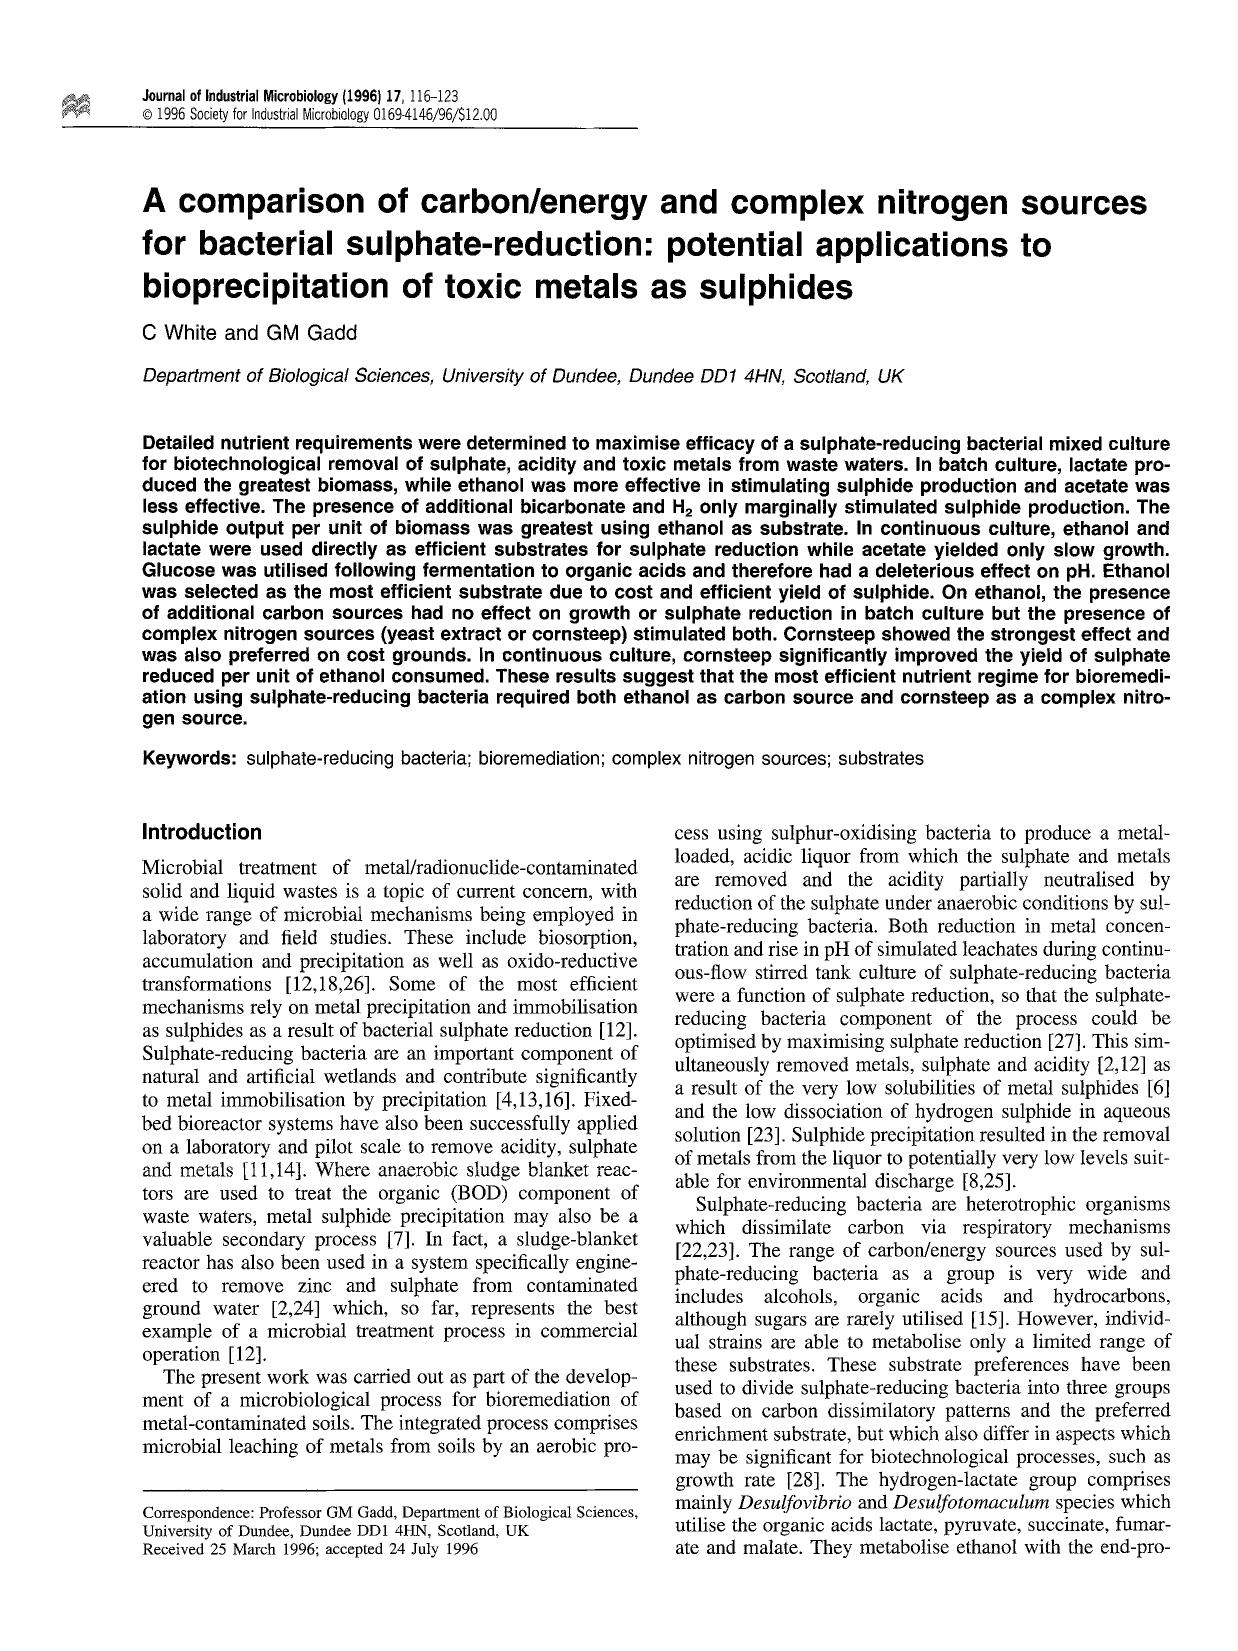 A comparison of carbonenergy and complex nitrogen sources for bacterial sulphate-reduction: potential applications to bioprecipitation of toxic metals as sulphides by Unknown